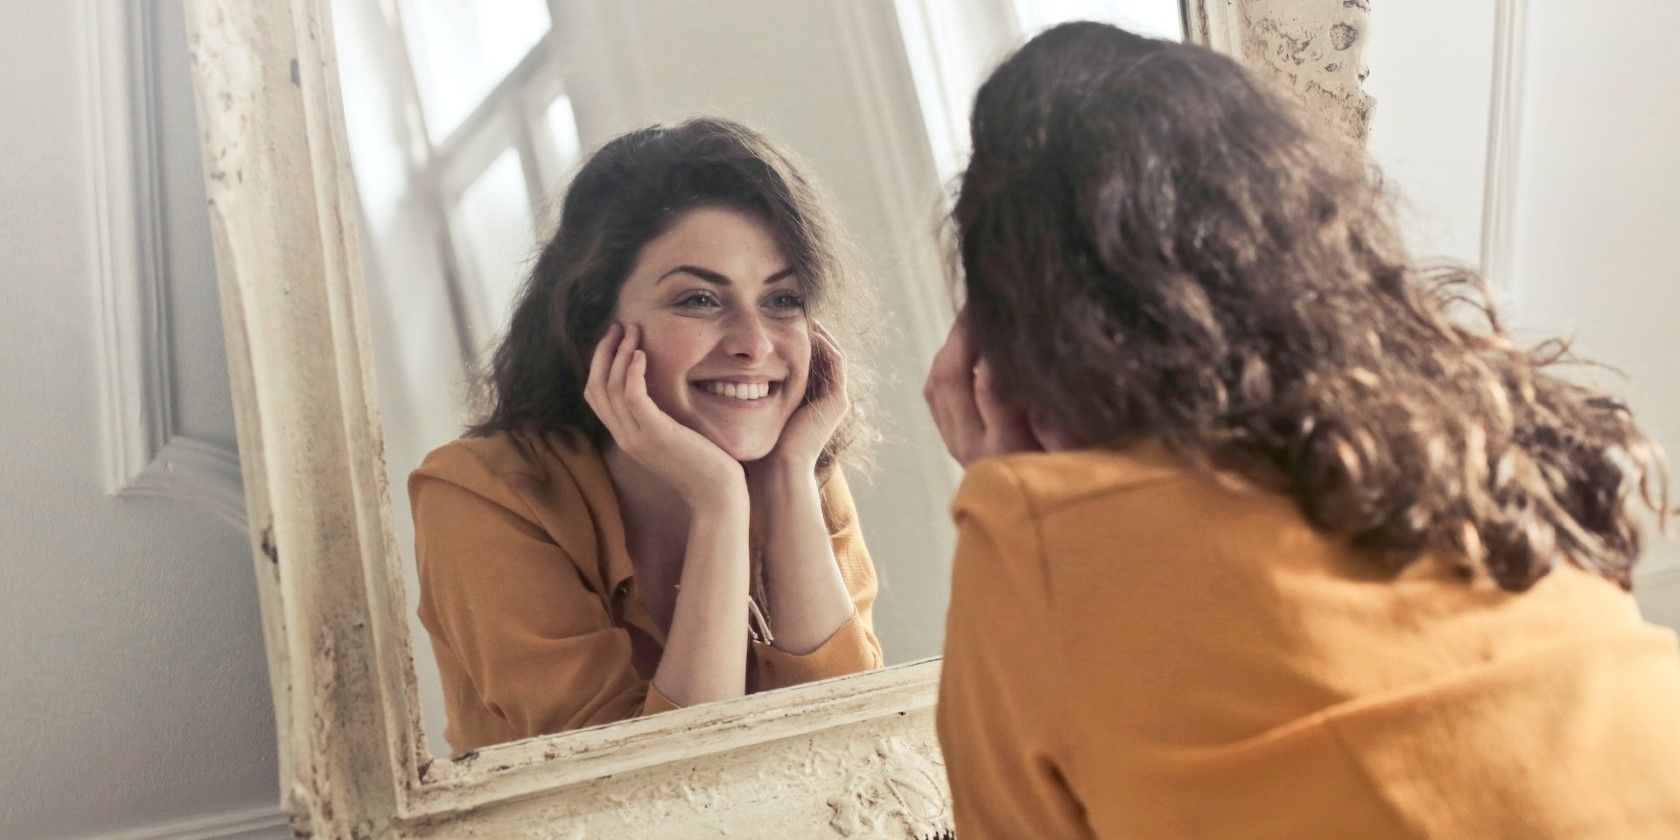 woman smiling at herself in mirror